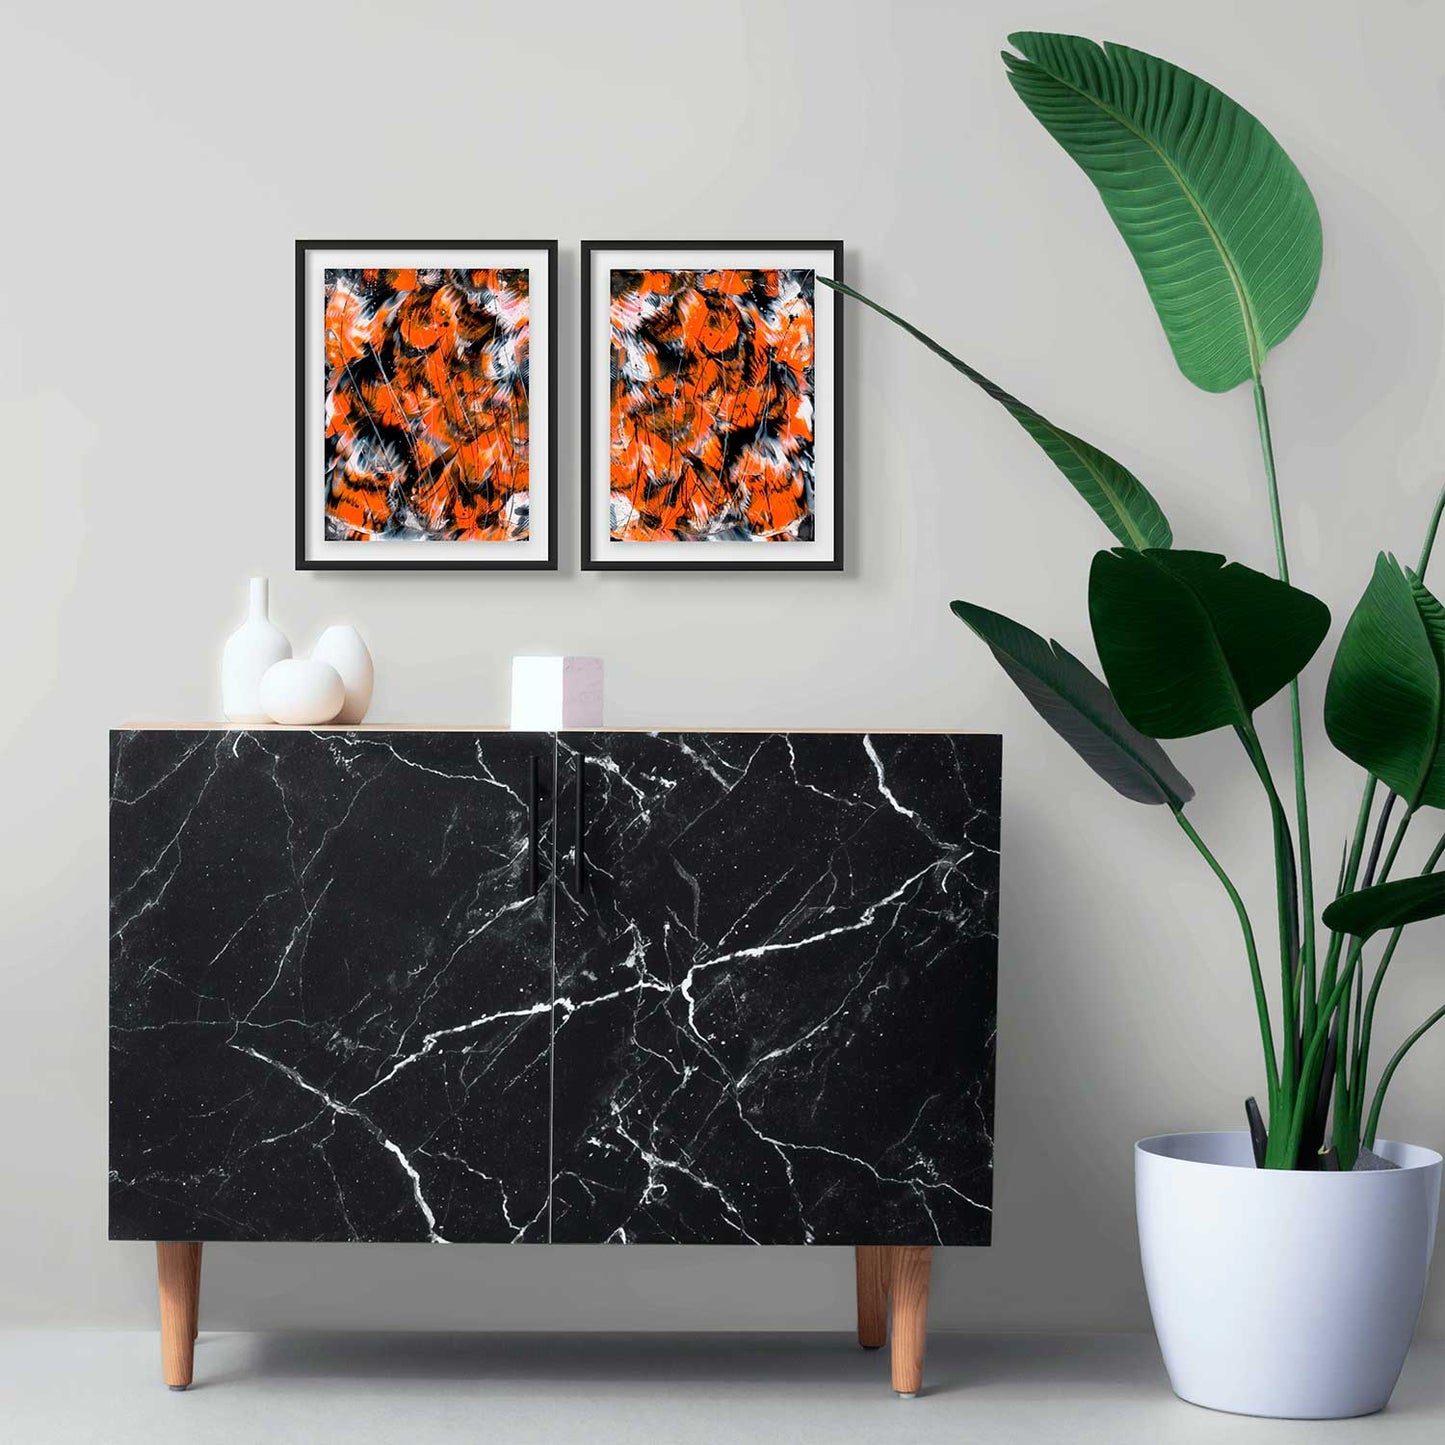 'Monarch 1' and 'Monarch 2' Butterfly Series, Original Paintings on Paper by Bridget Bradley seen side by side framed in blac and hanging above marble console with pot plant. Buy pair to complete the look